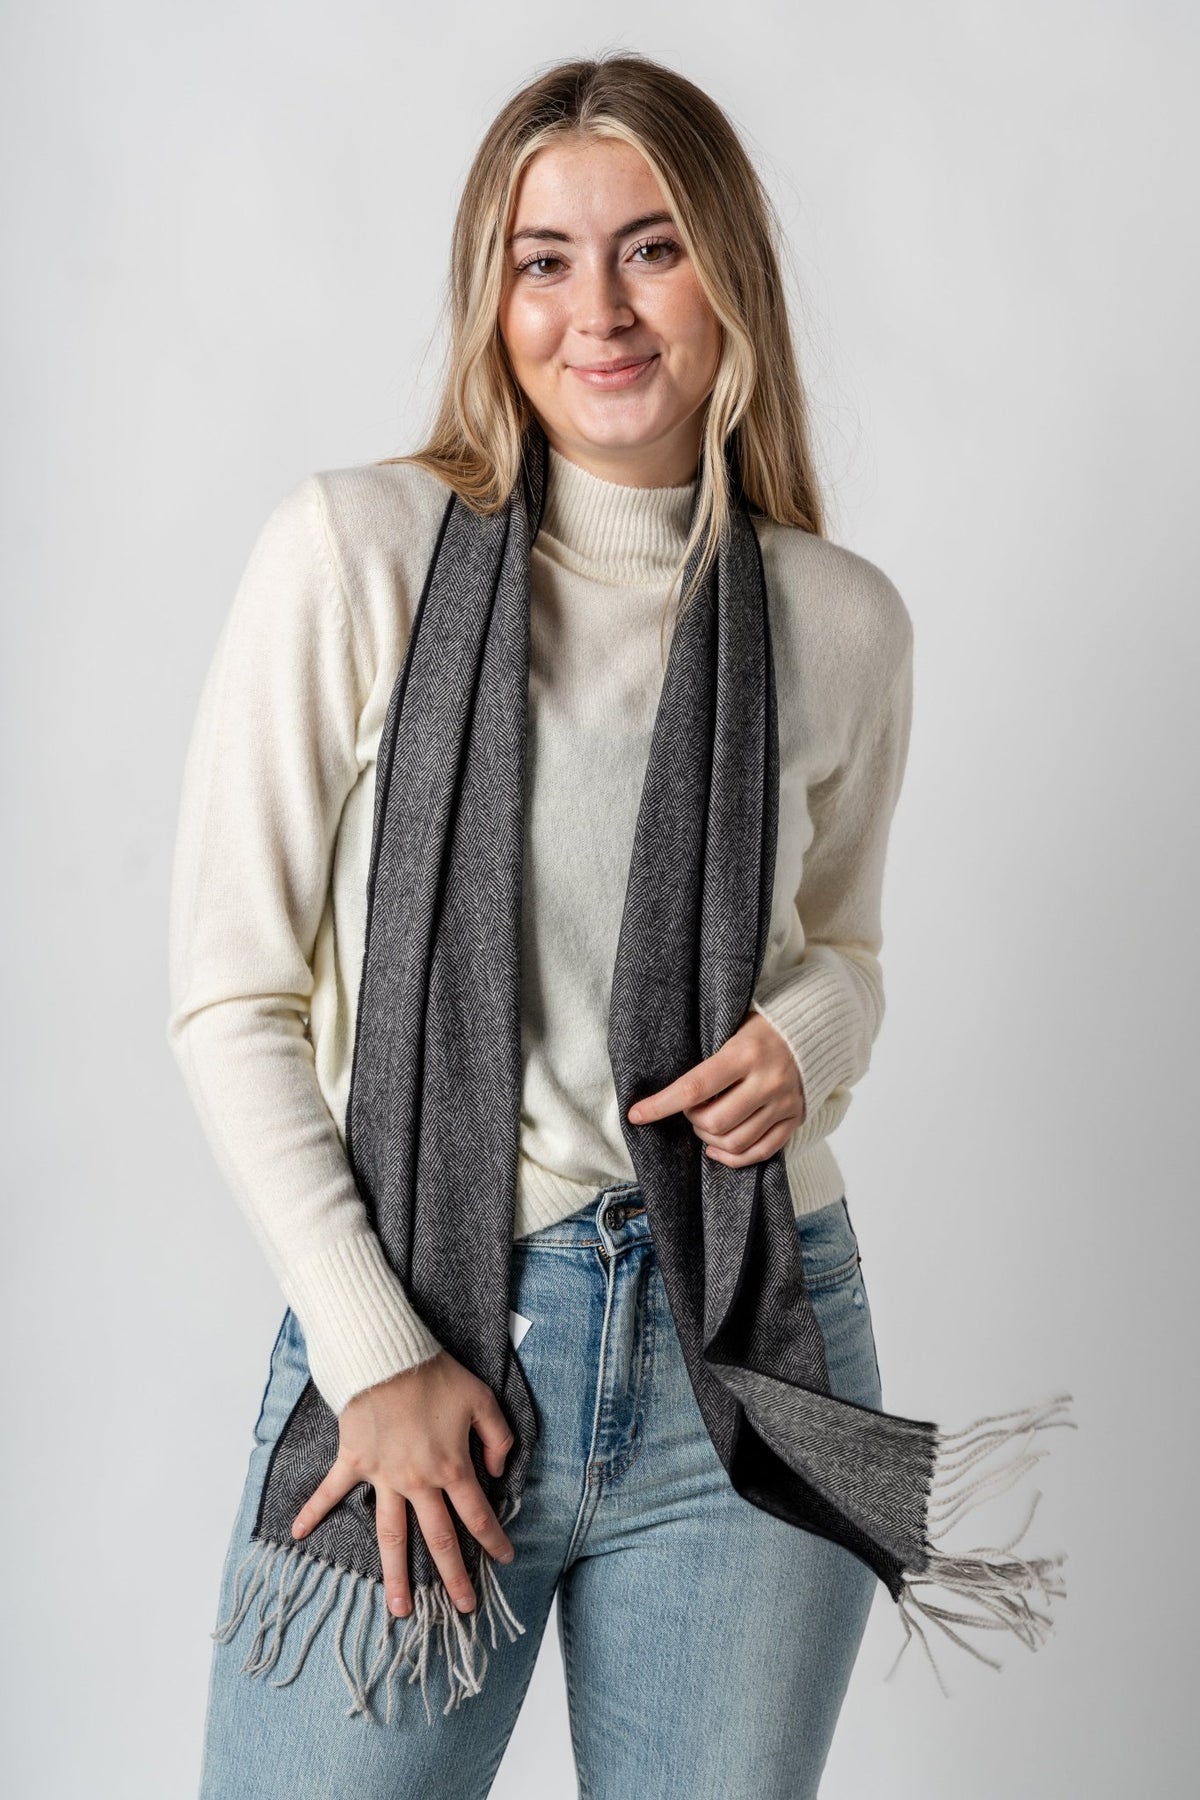 Herringbone muffler classic scarf black - Trendy Gifts at Lush Fashion Lounge Boutique in Oklahoma City